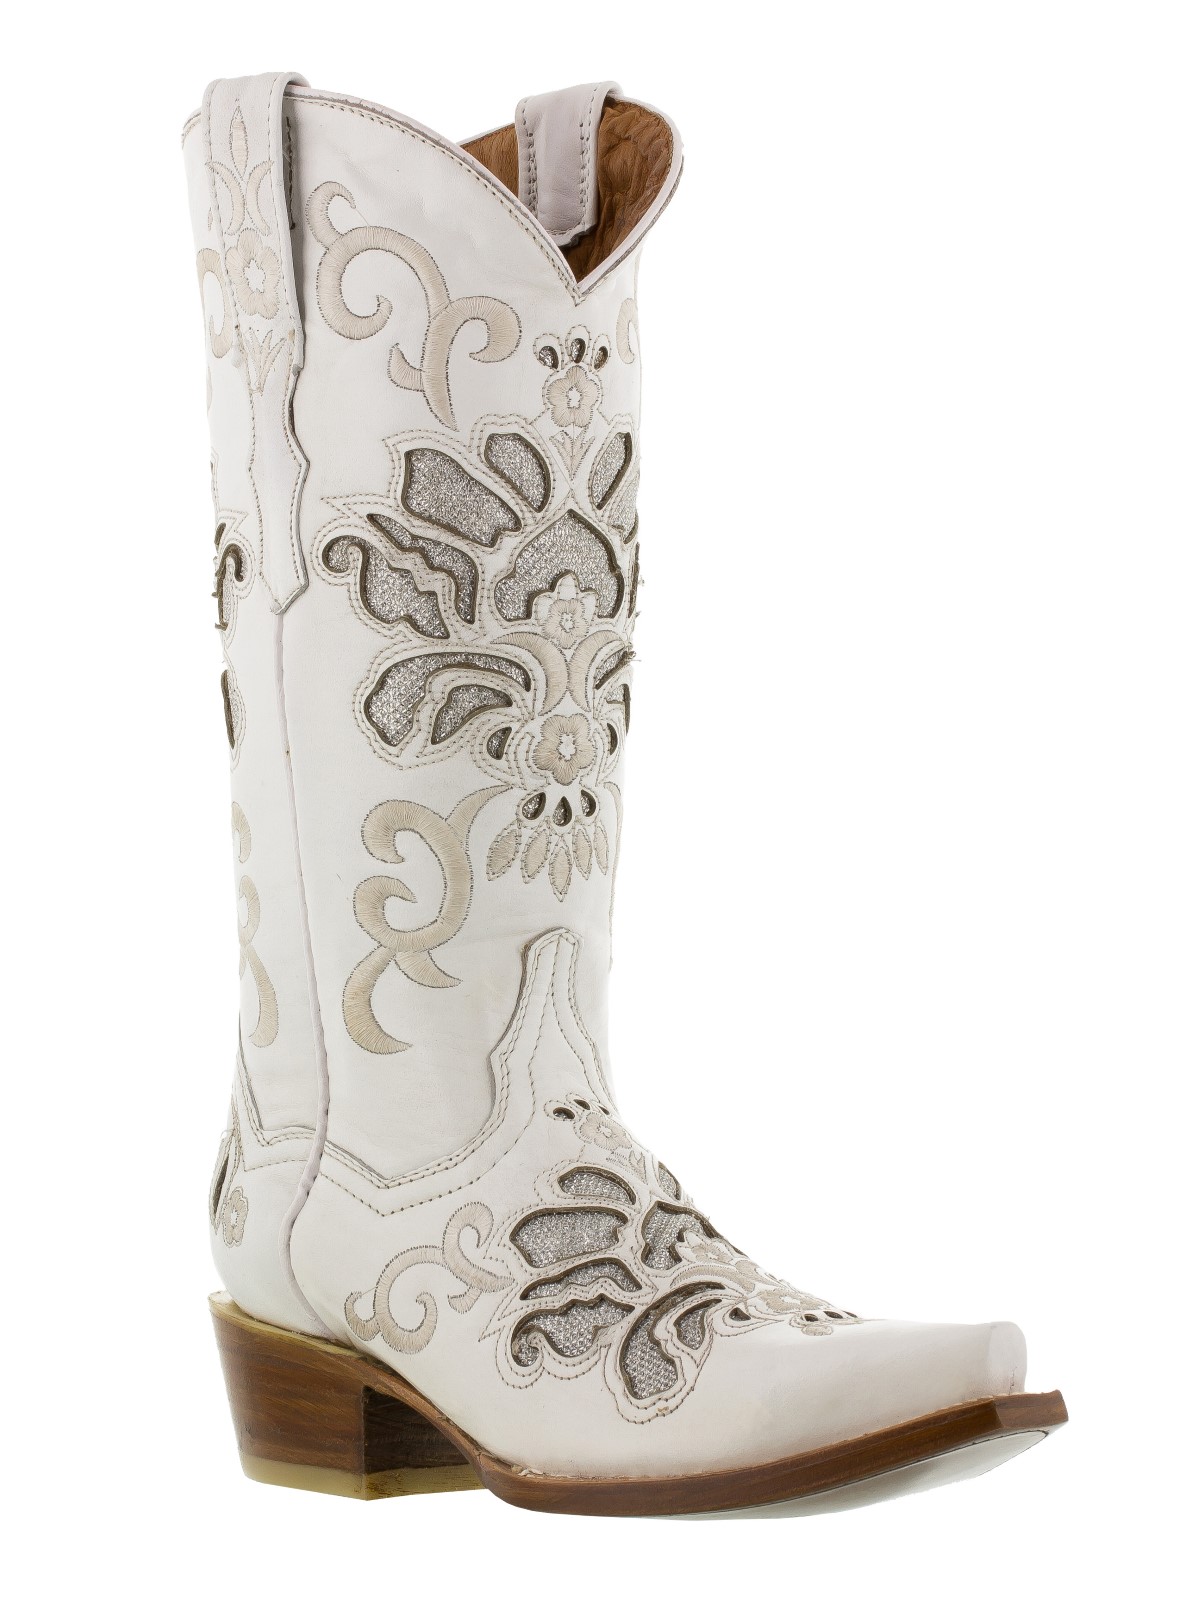 Womens White Overlay Leather Cowboy Cowgirl Leather Boots Western Riding Rodeo | eBay